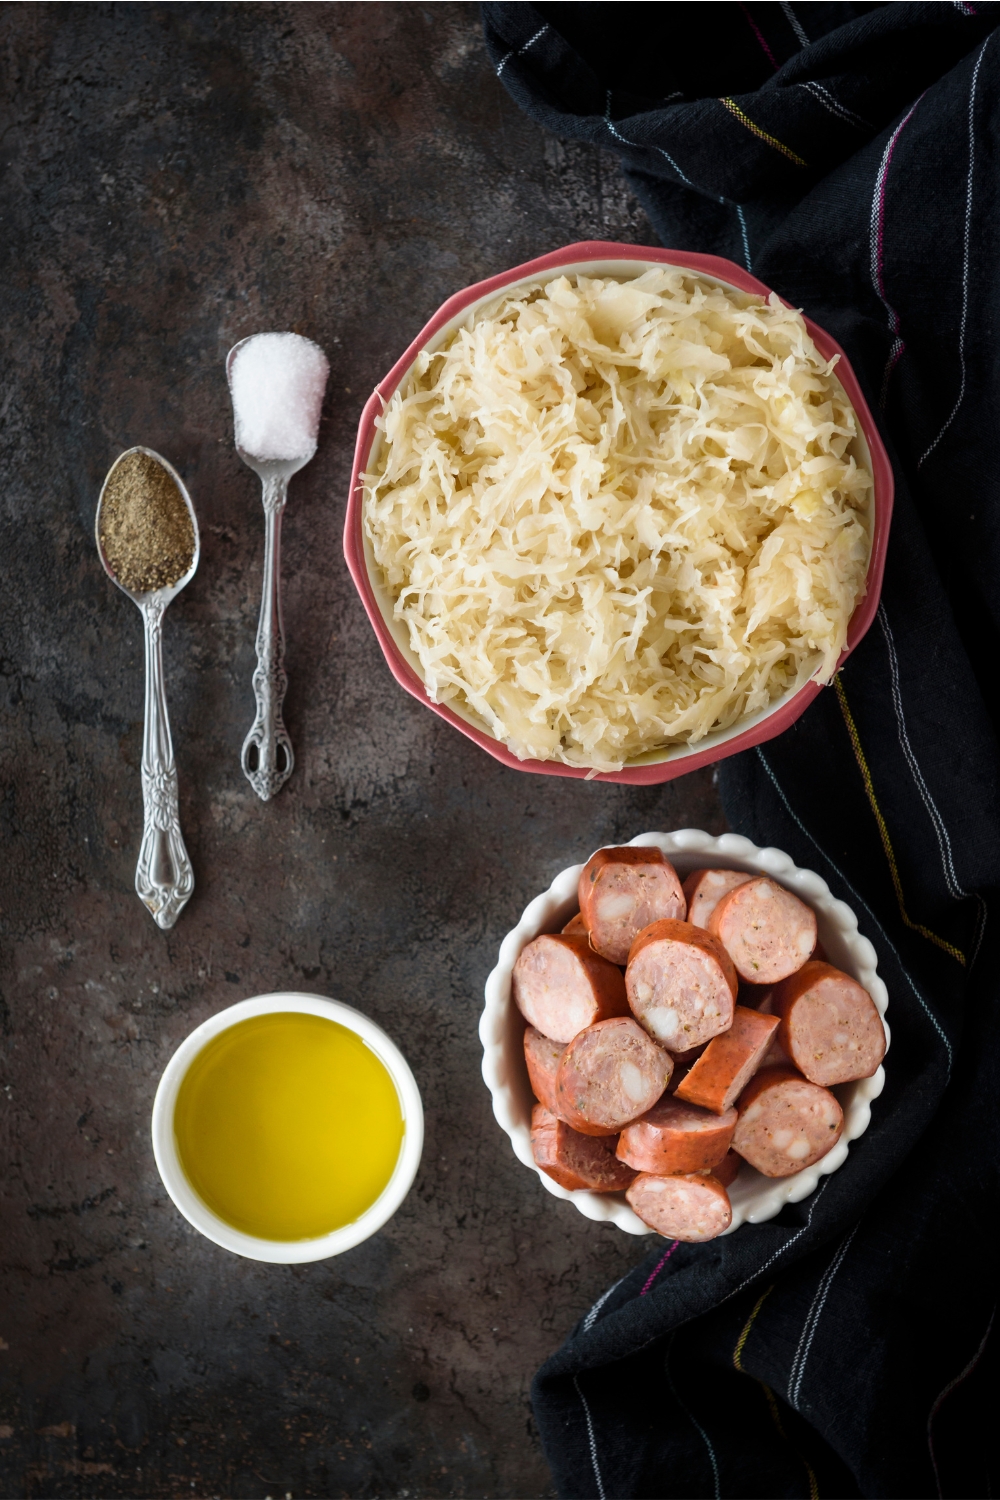 An assortment of ingredients including bowls of sauerkraut, sliced sausages, oil, and two spoonfuls of salt and black pepper.